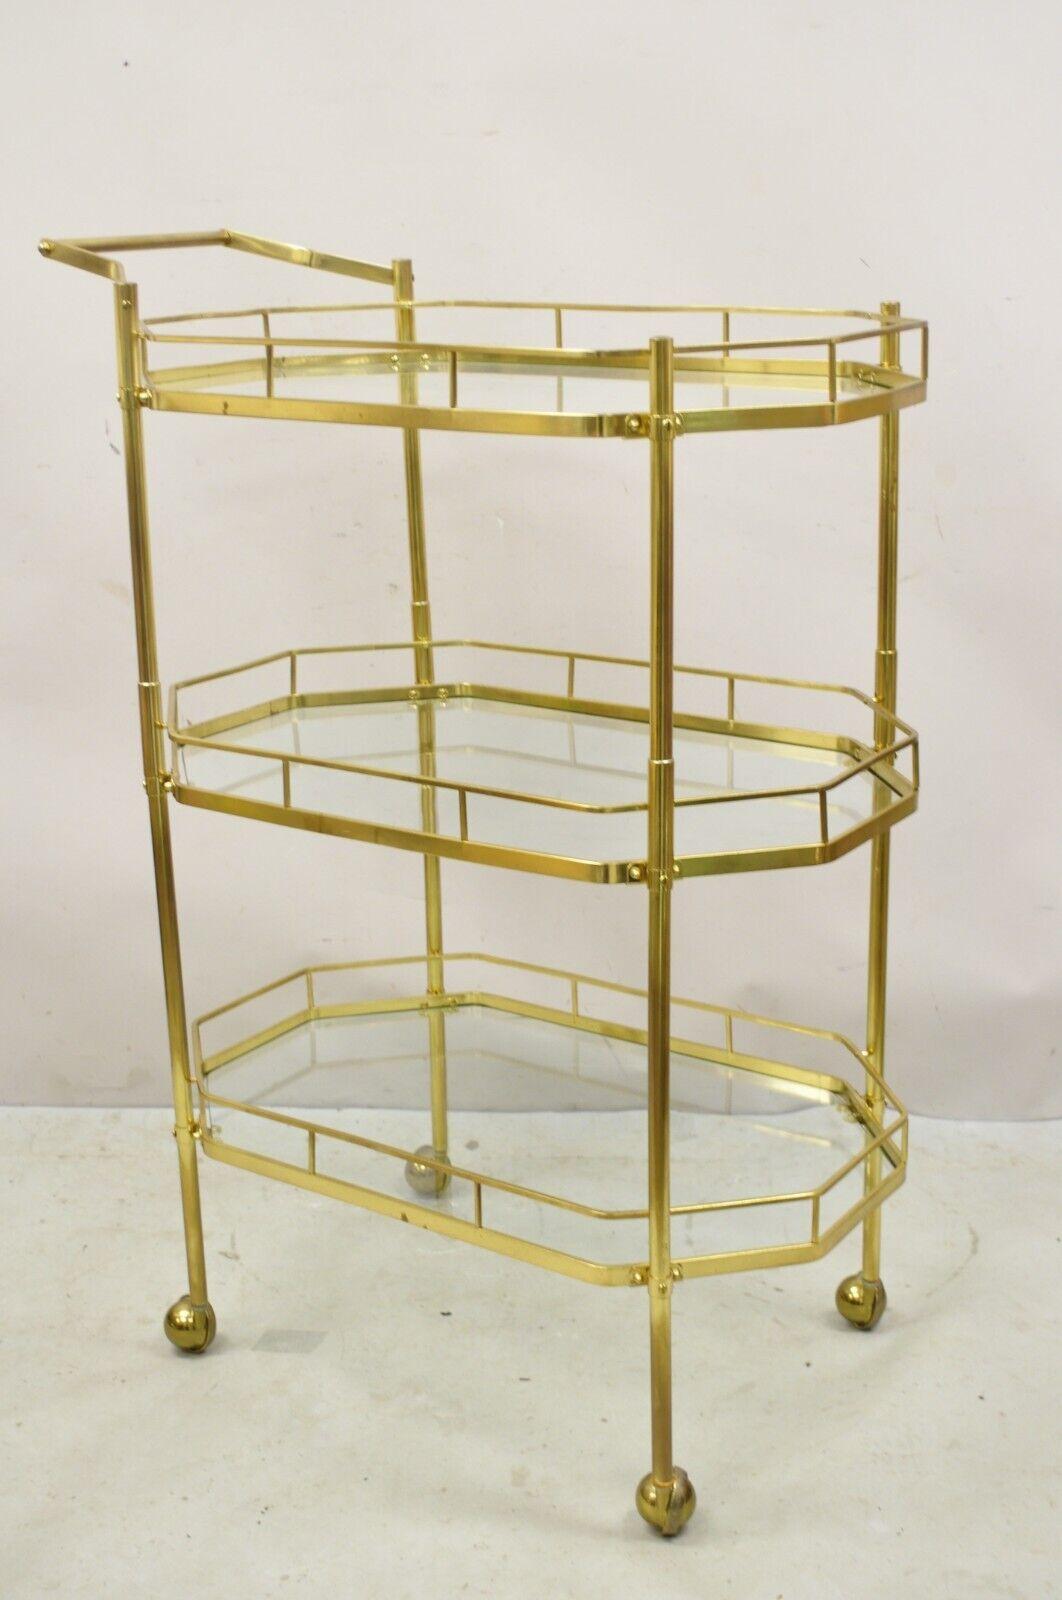 Mid Century Italian Modern Brass and Glass 3 Tier Rolling Bar Cart Serving Table. Item features a  very rare 3 tier frame, rolling casters, great style and form. Circa Mid 20th Century. Measurements: 46